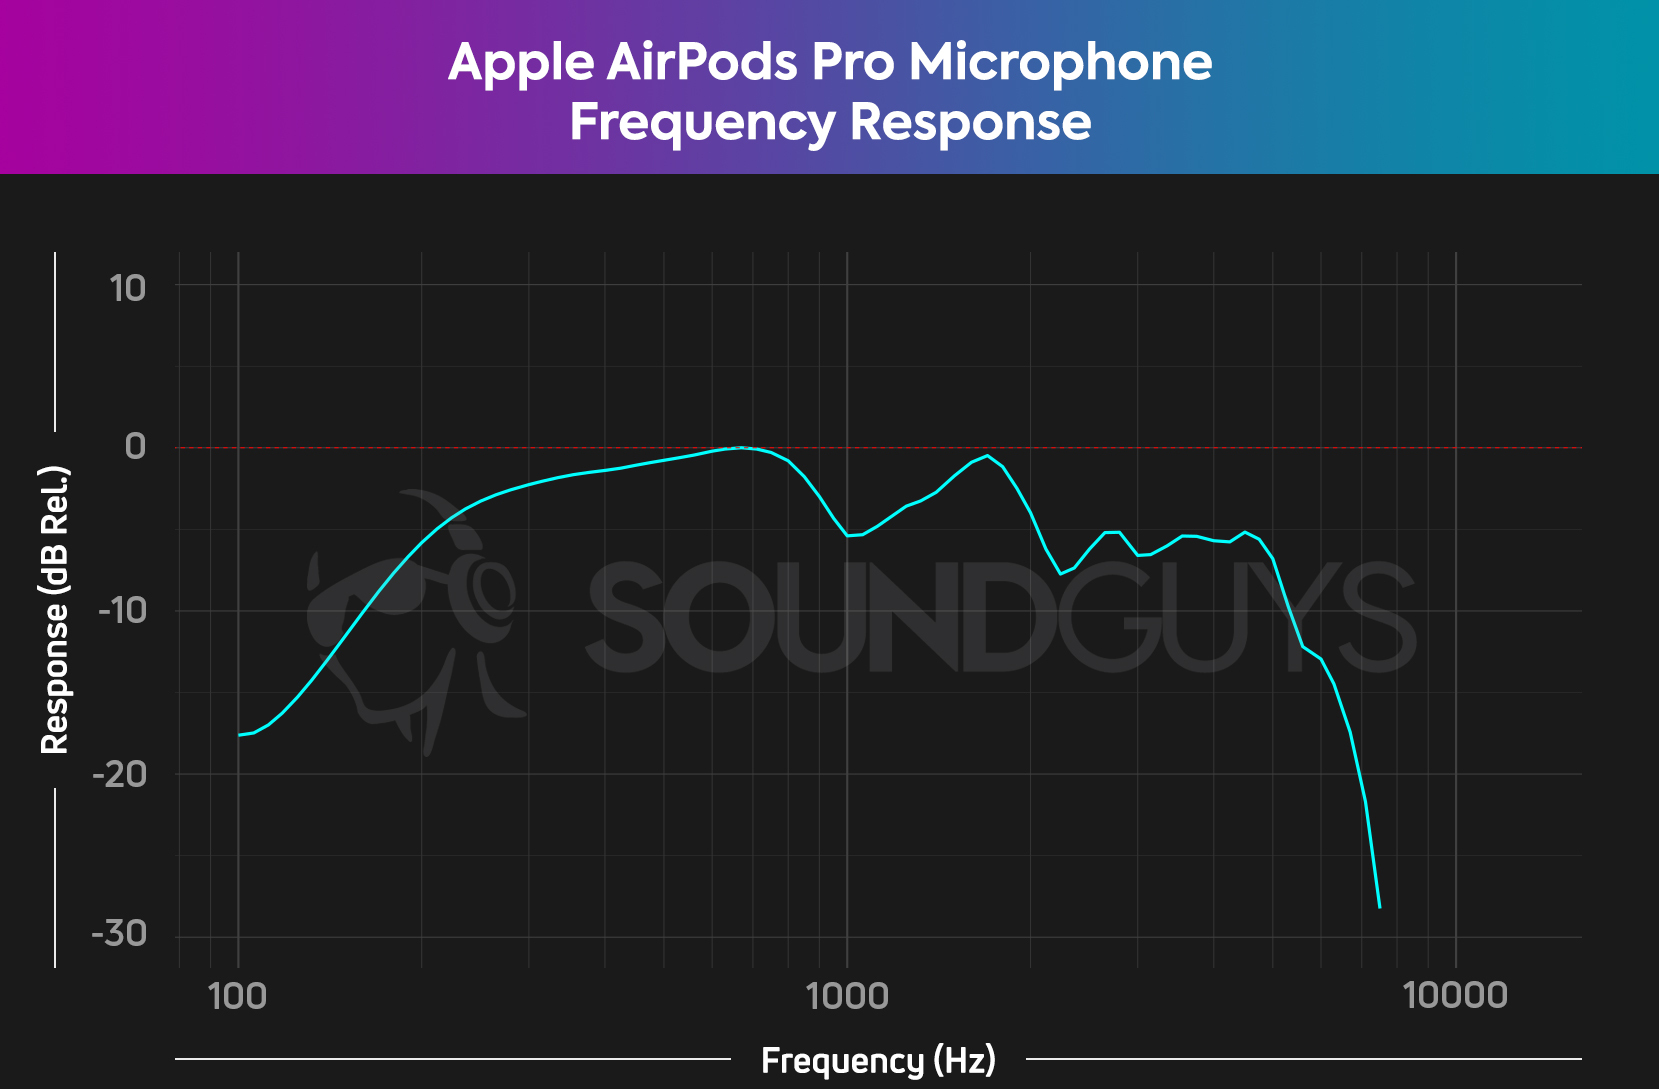 A frequency response chart for the Apple AirPods Pro microphone